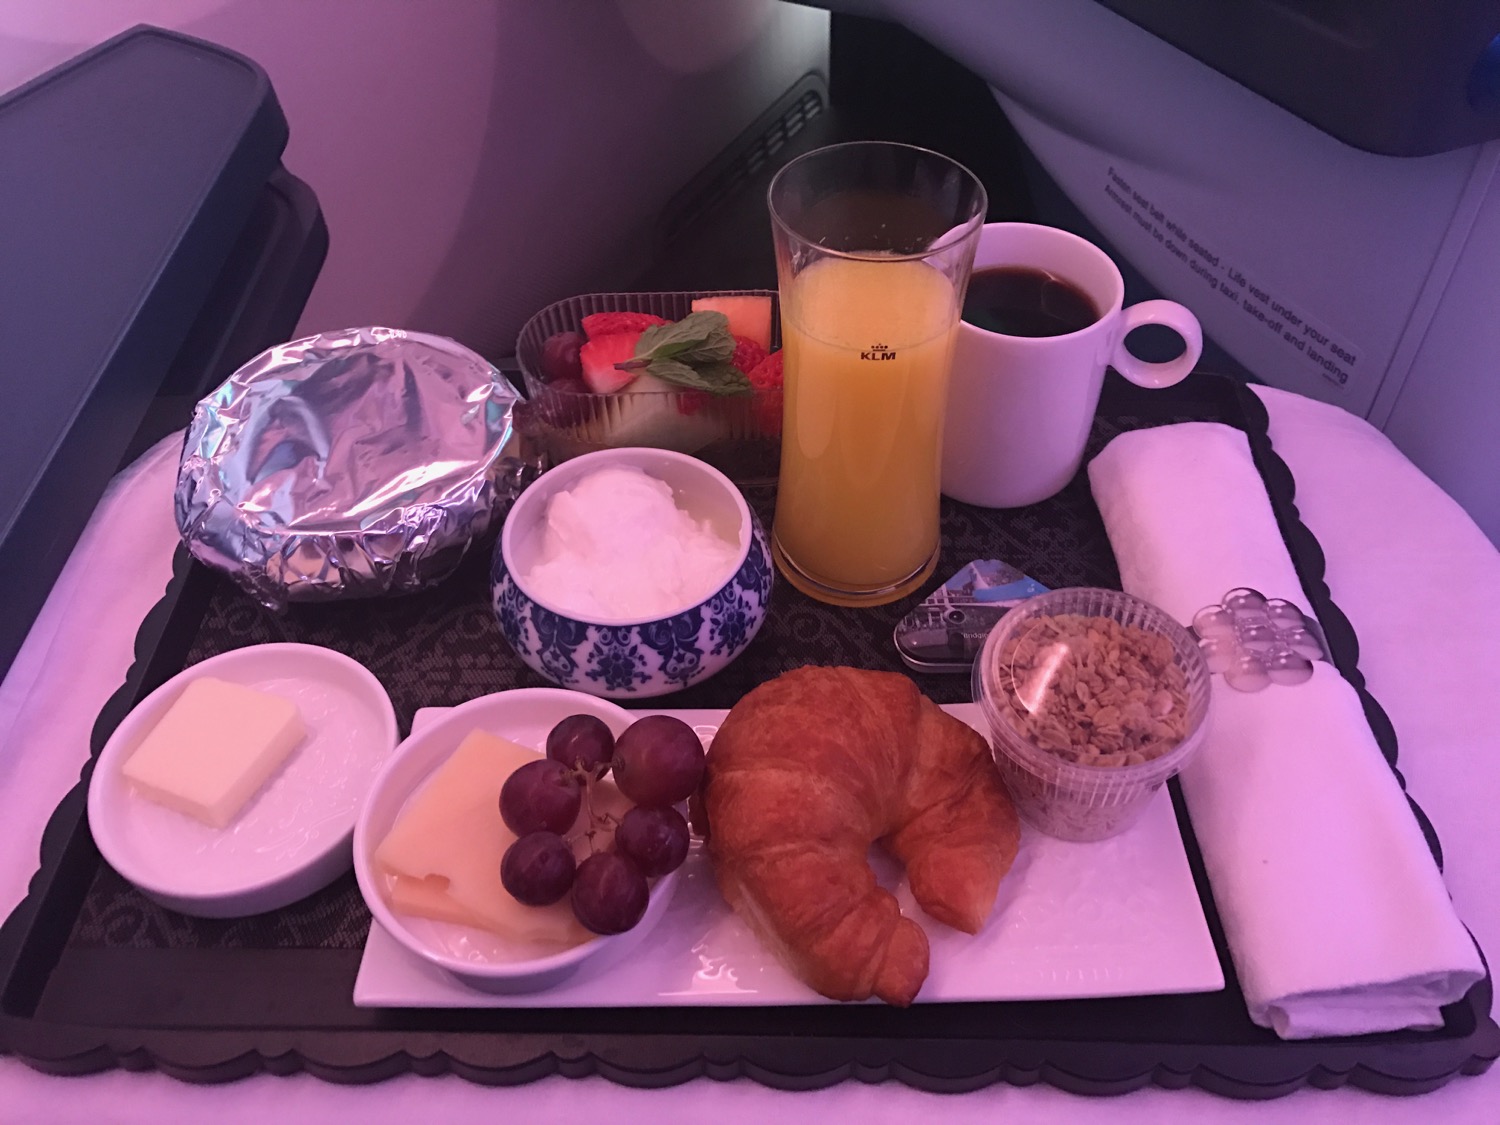 KLM 787 Business Class Review - 86